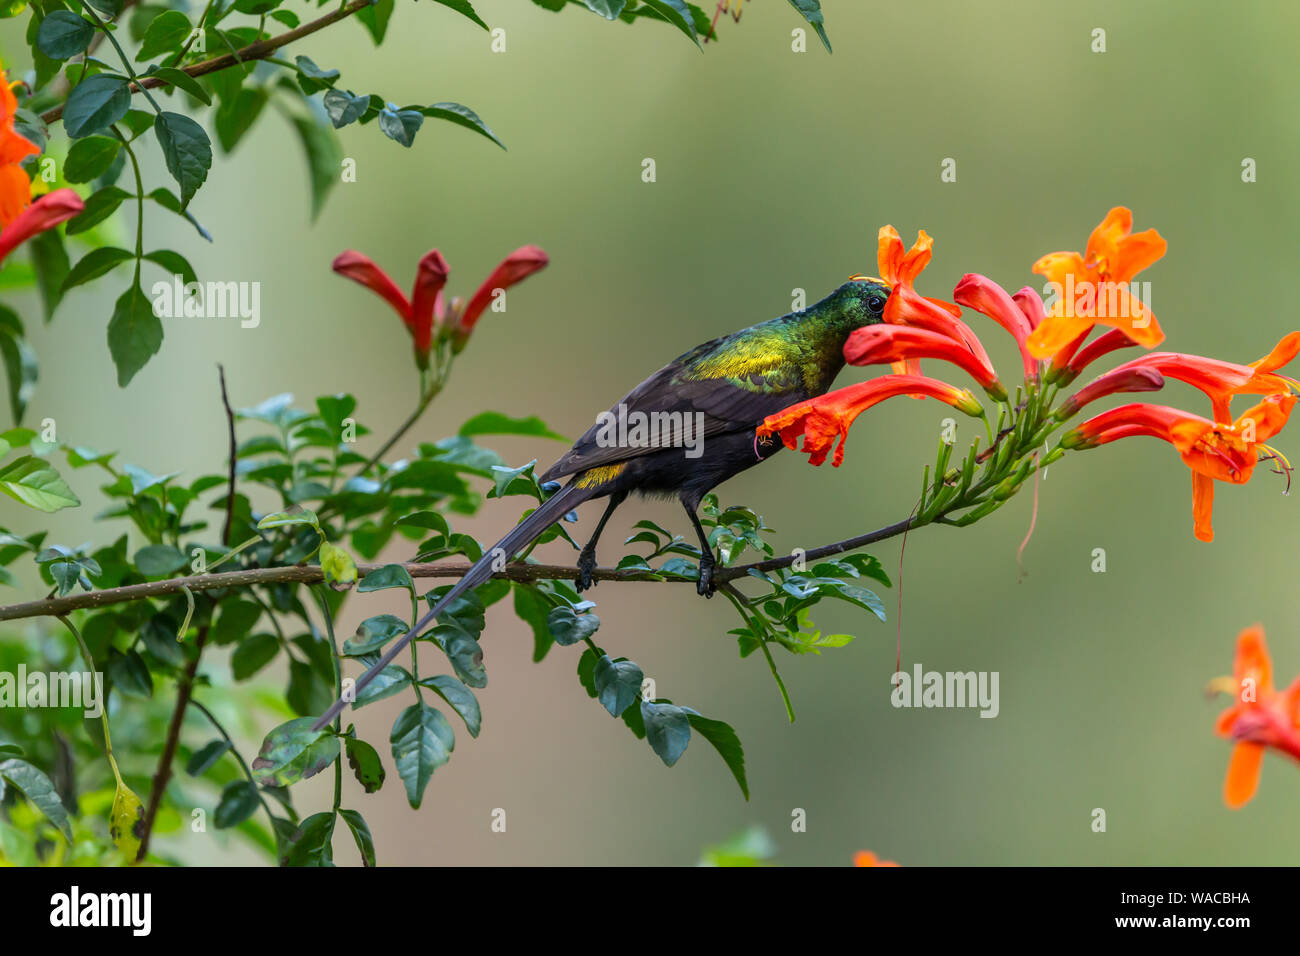 Colour wildlife portrait of Bronzy sunbird (Nectarinia kilimensis) perched on branch feeding on nectar from beautiful red and orange flowers, taken in Stock Photo